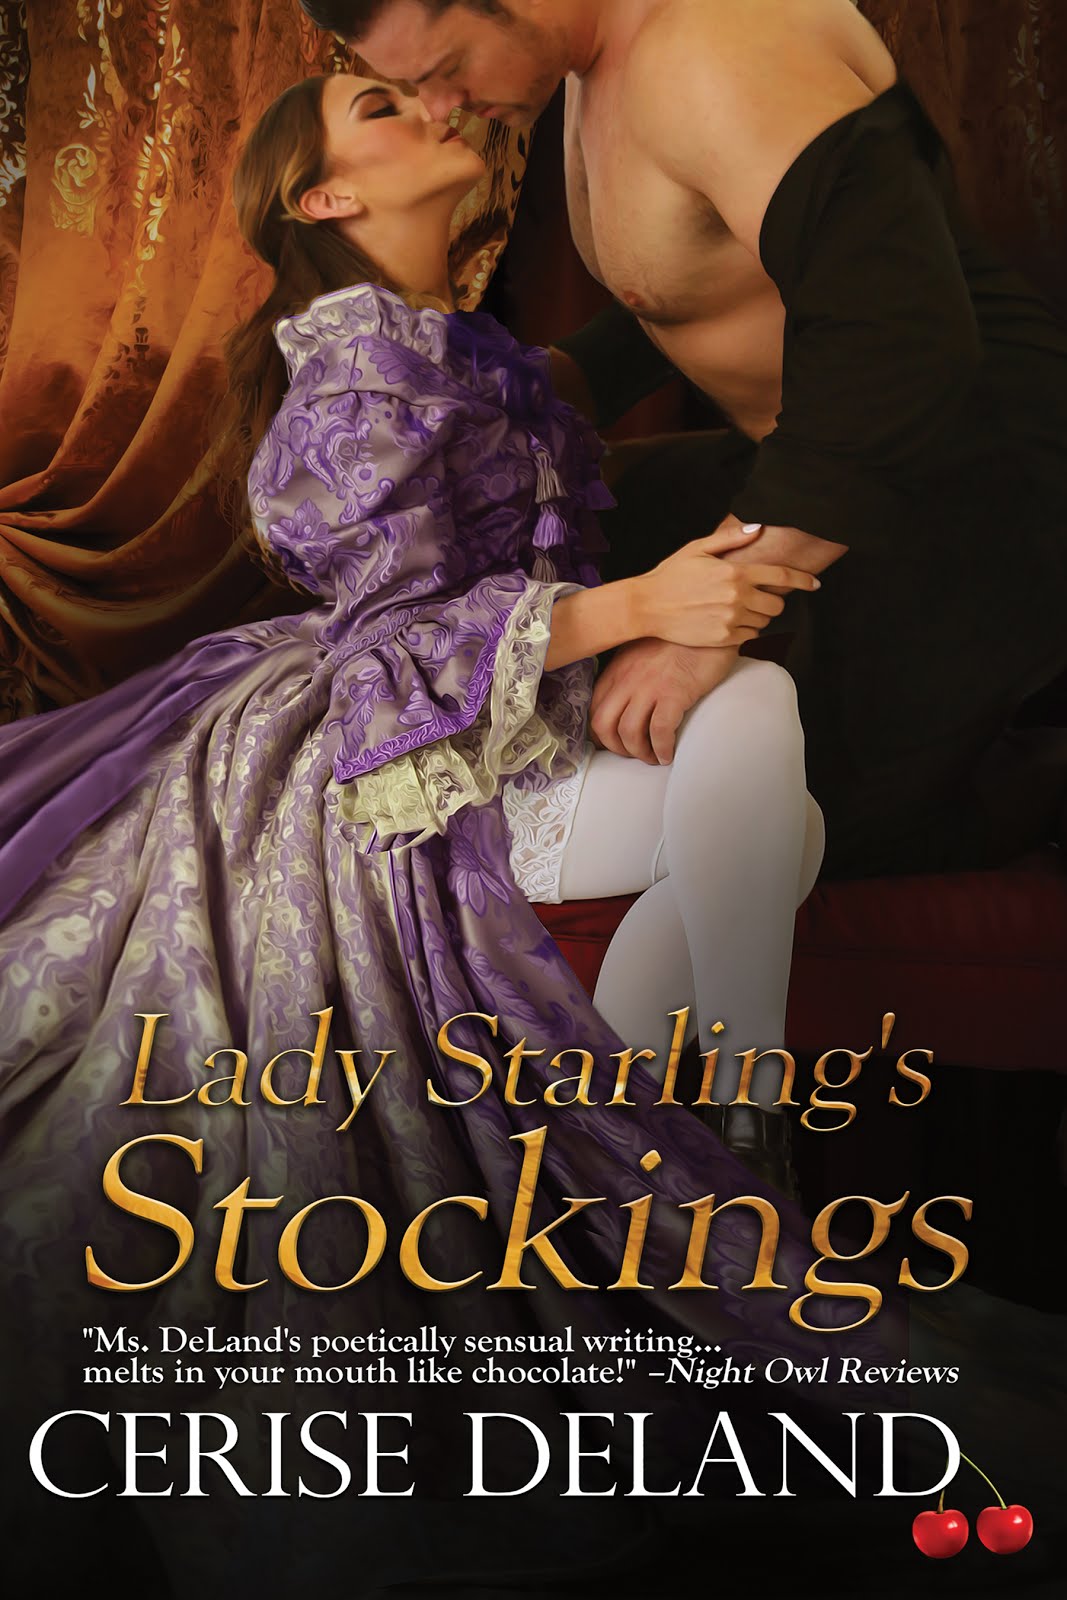 LADY STARLING'S STOCKINGS